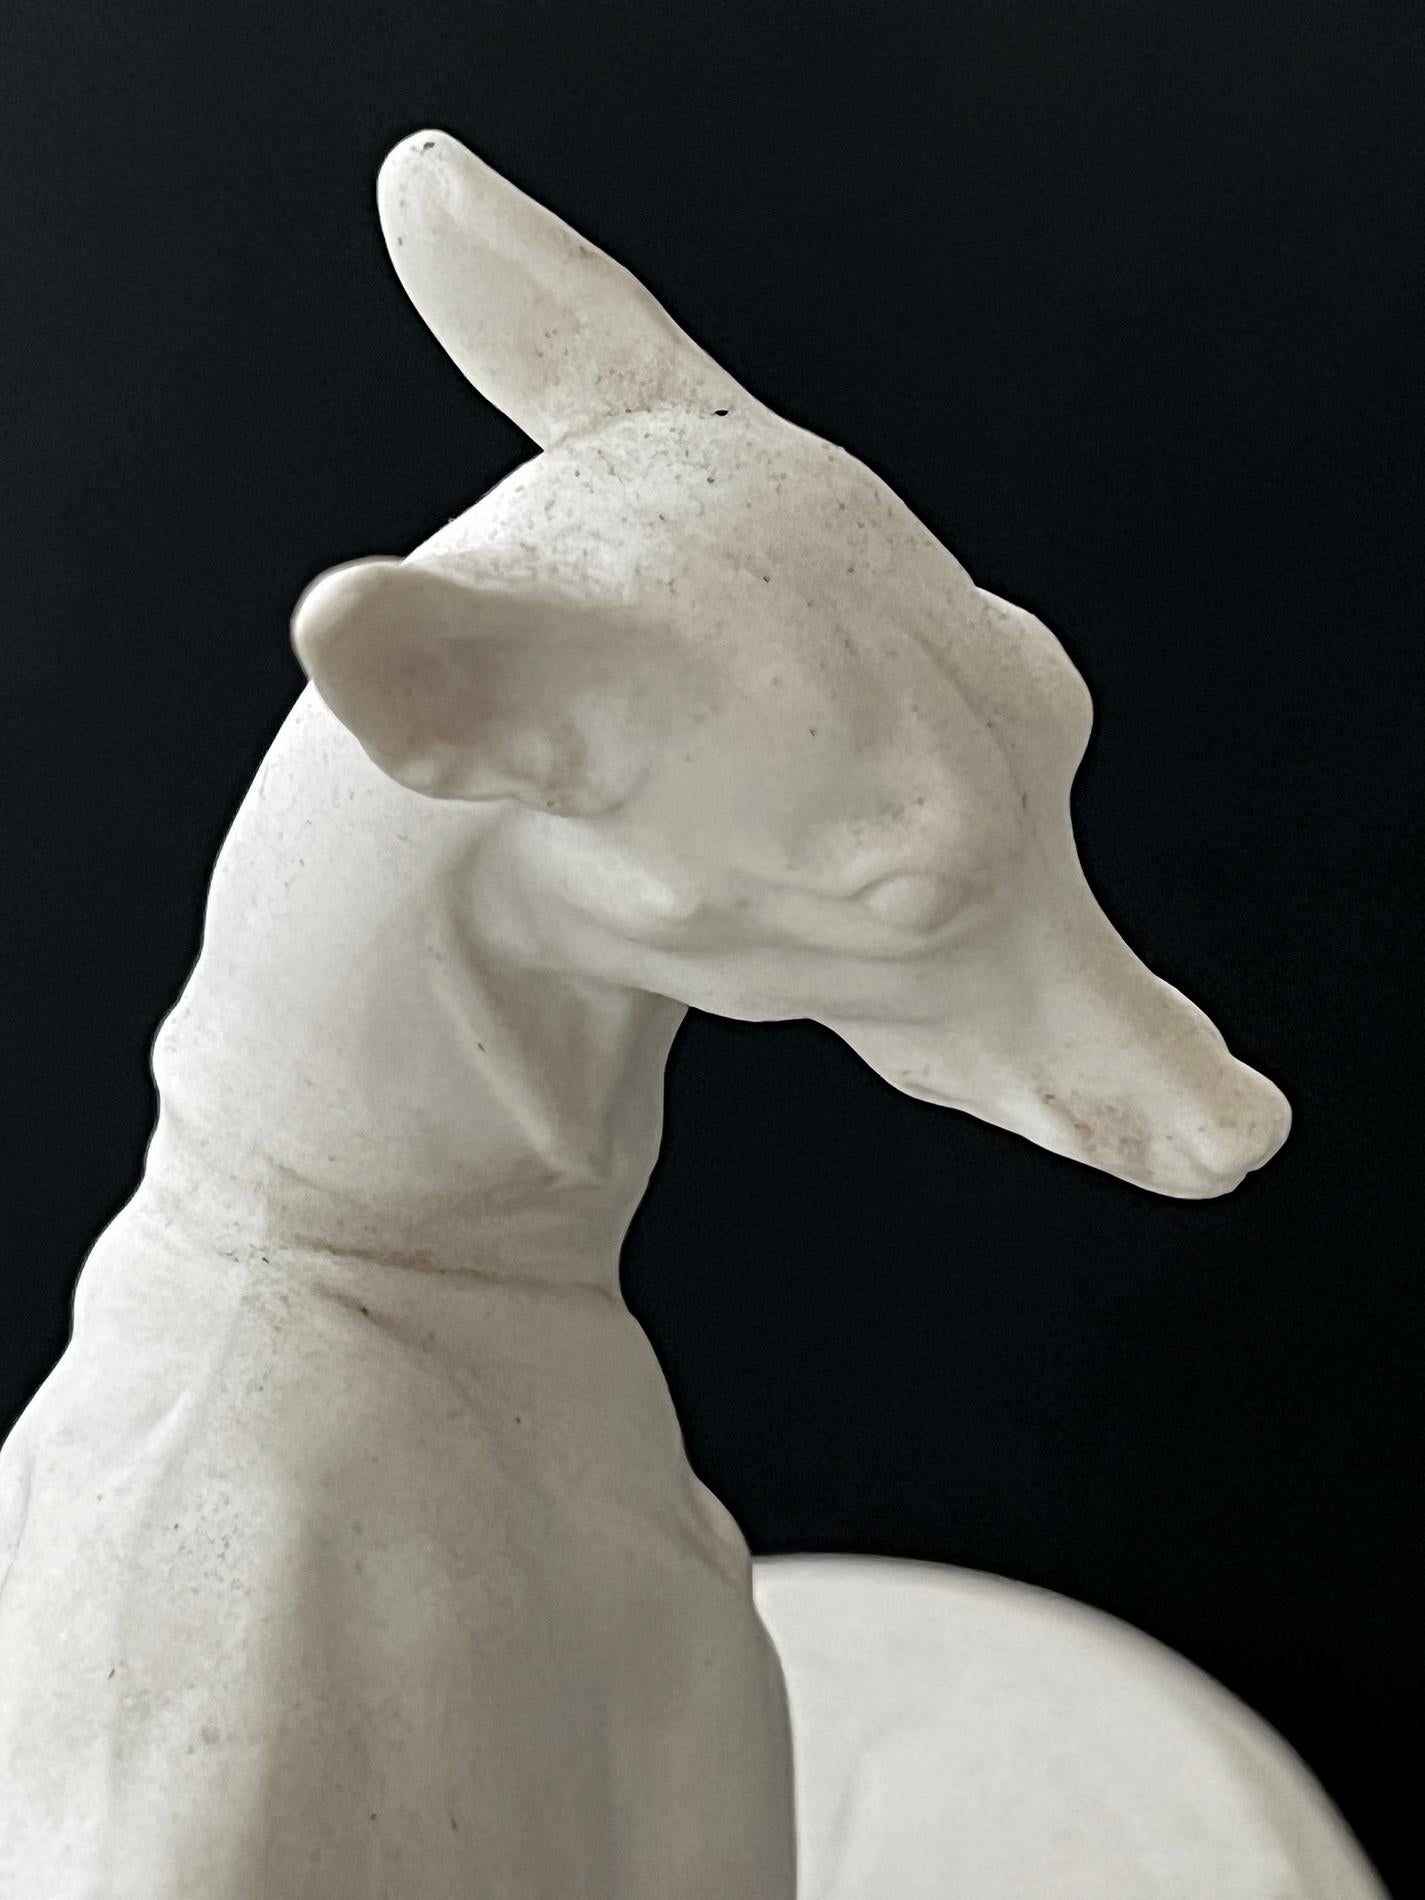 Mid-20th Century A Rare Pair of Bisque Porcelain Whippet Figurines by Boehm Studios For Sale